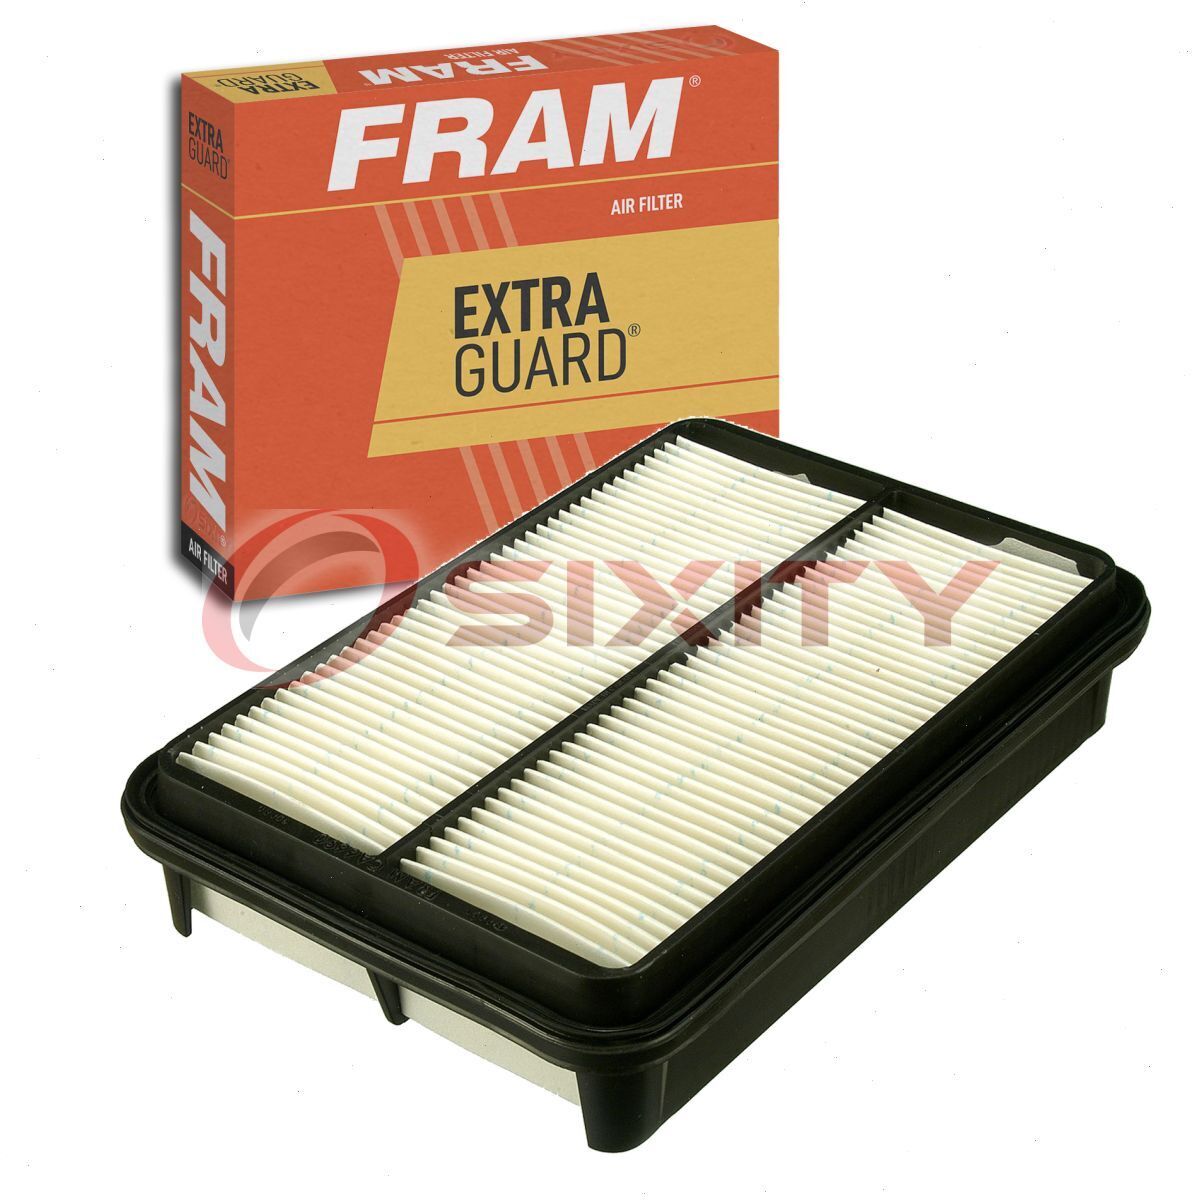 FRAM Extra Guard Air Filter for 1989-1995 Toyota Pickup Intake Inlet co